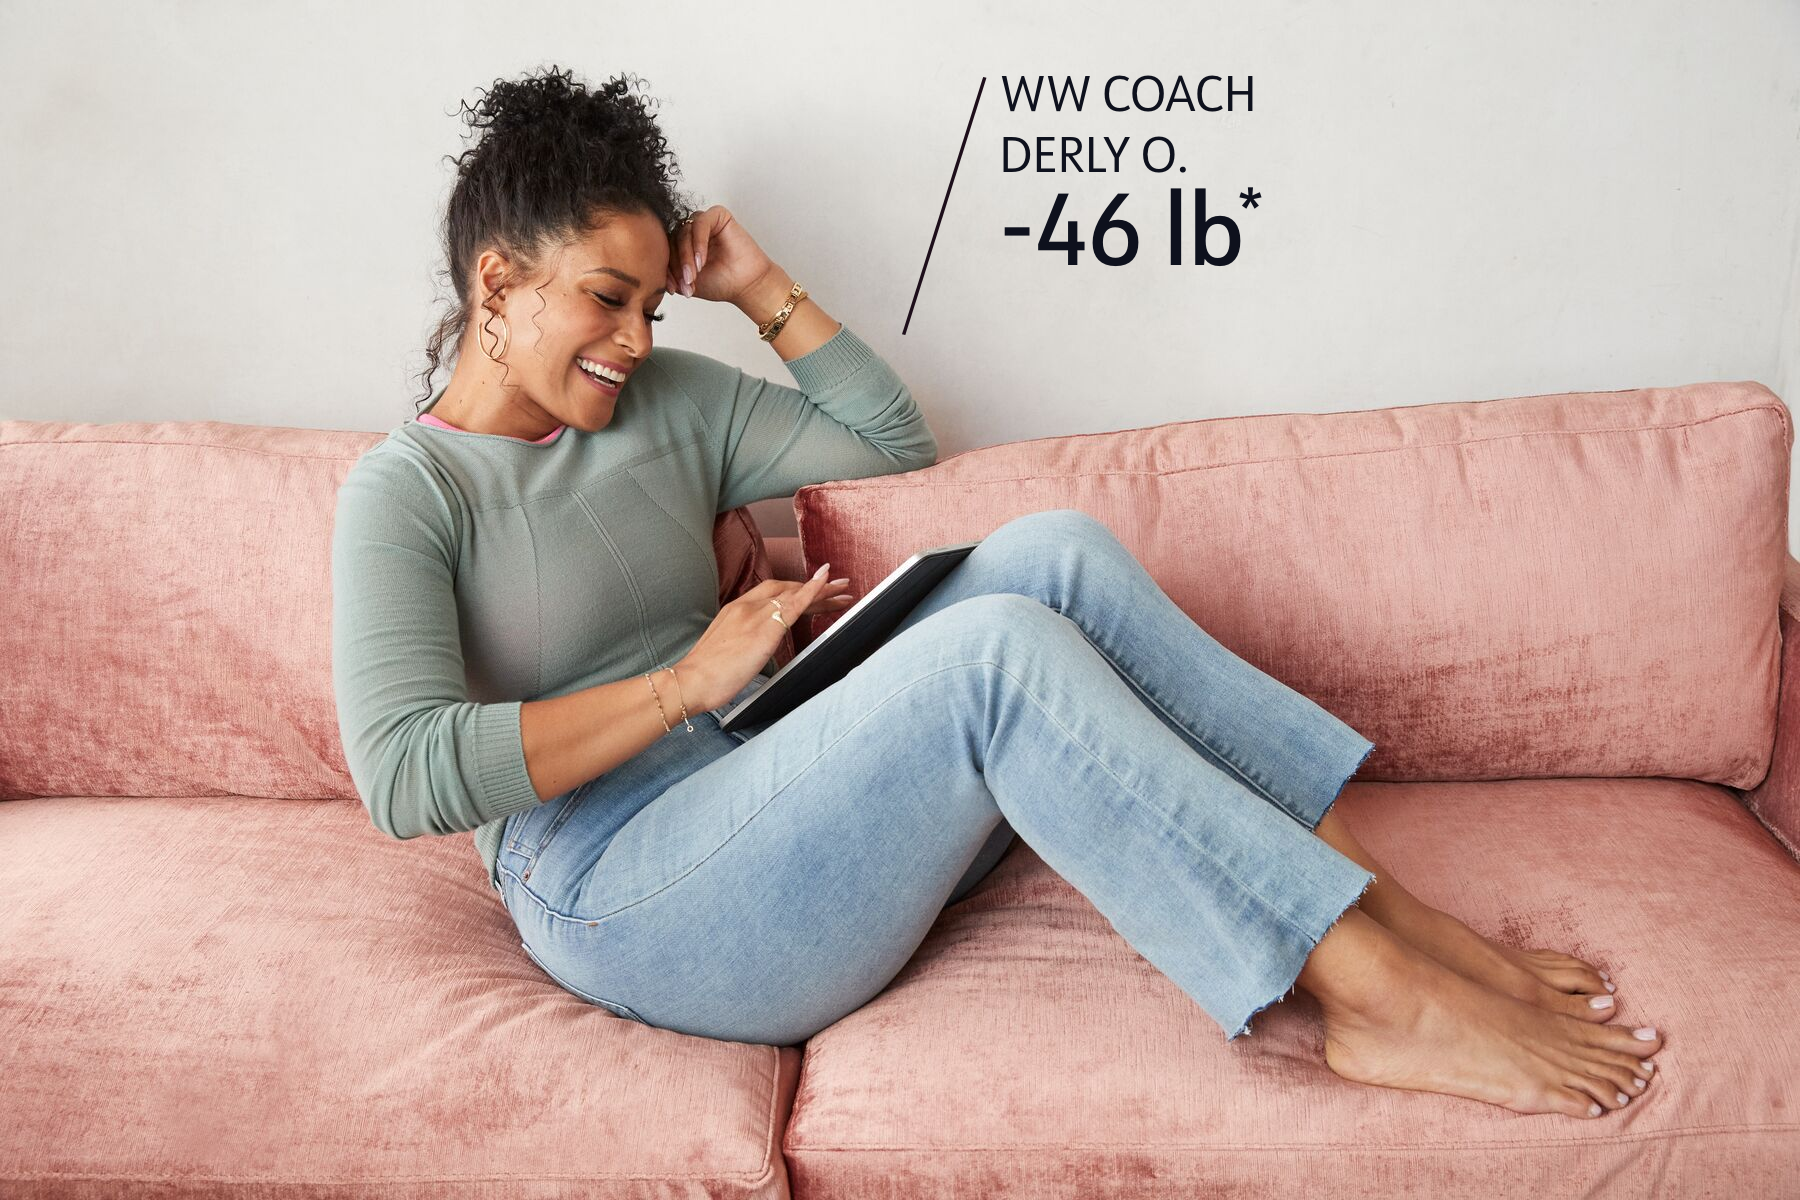 WW Coach Derly O. has lost 46 pounds. She is relaxing on a couch and looking at her tablet device.